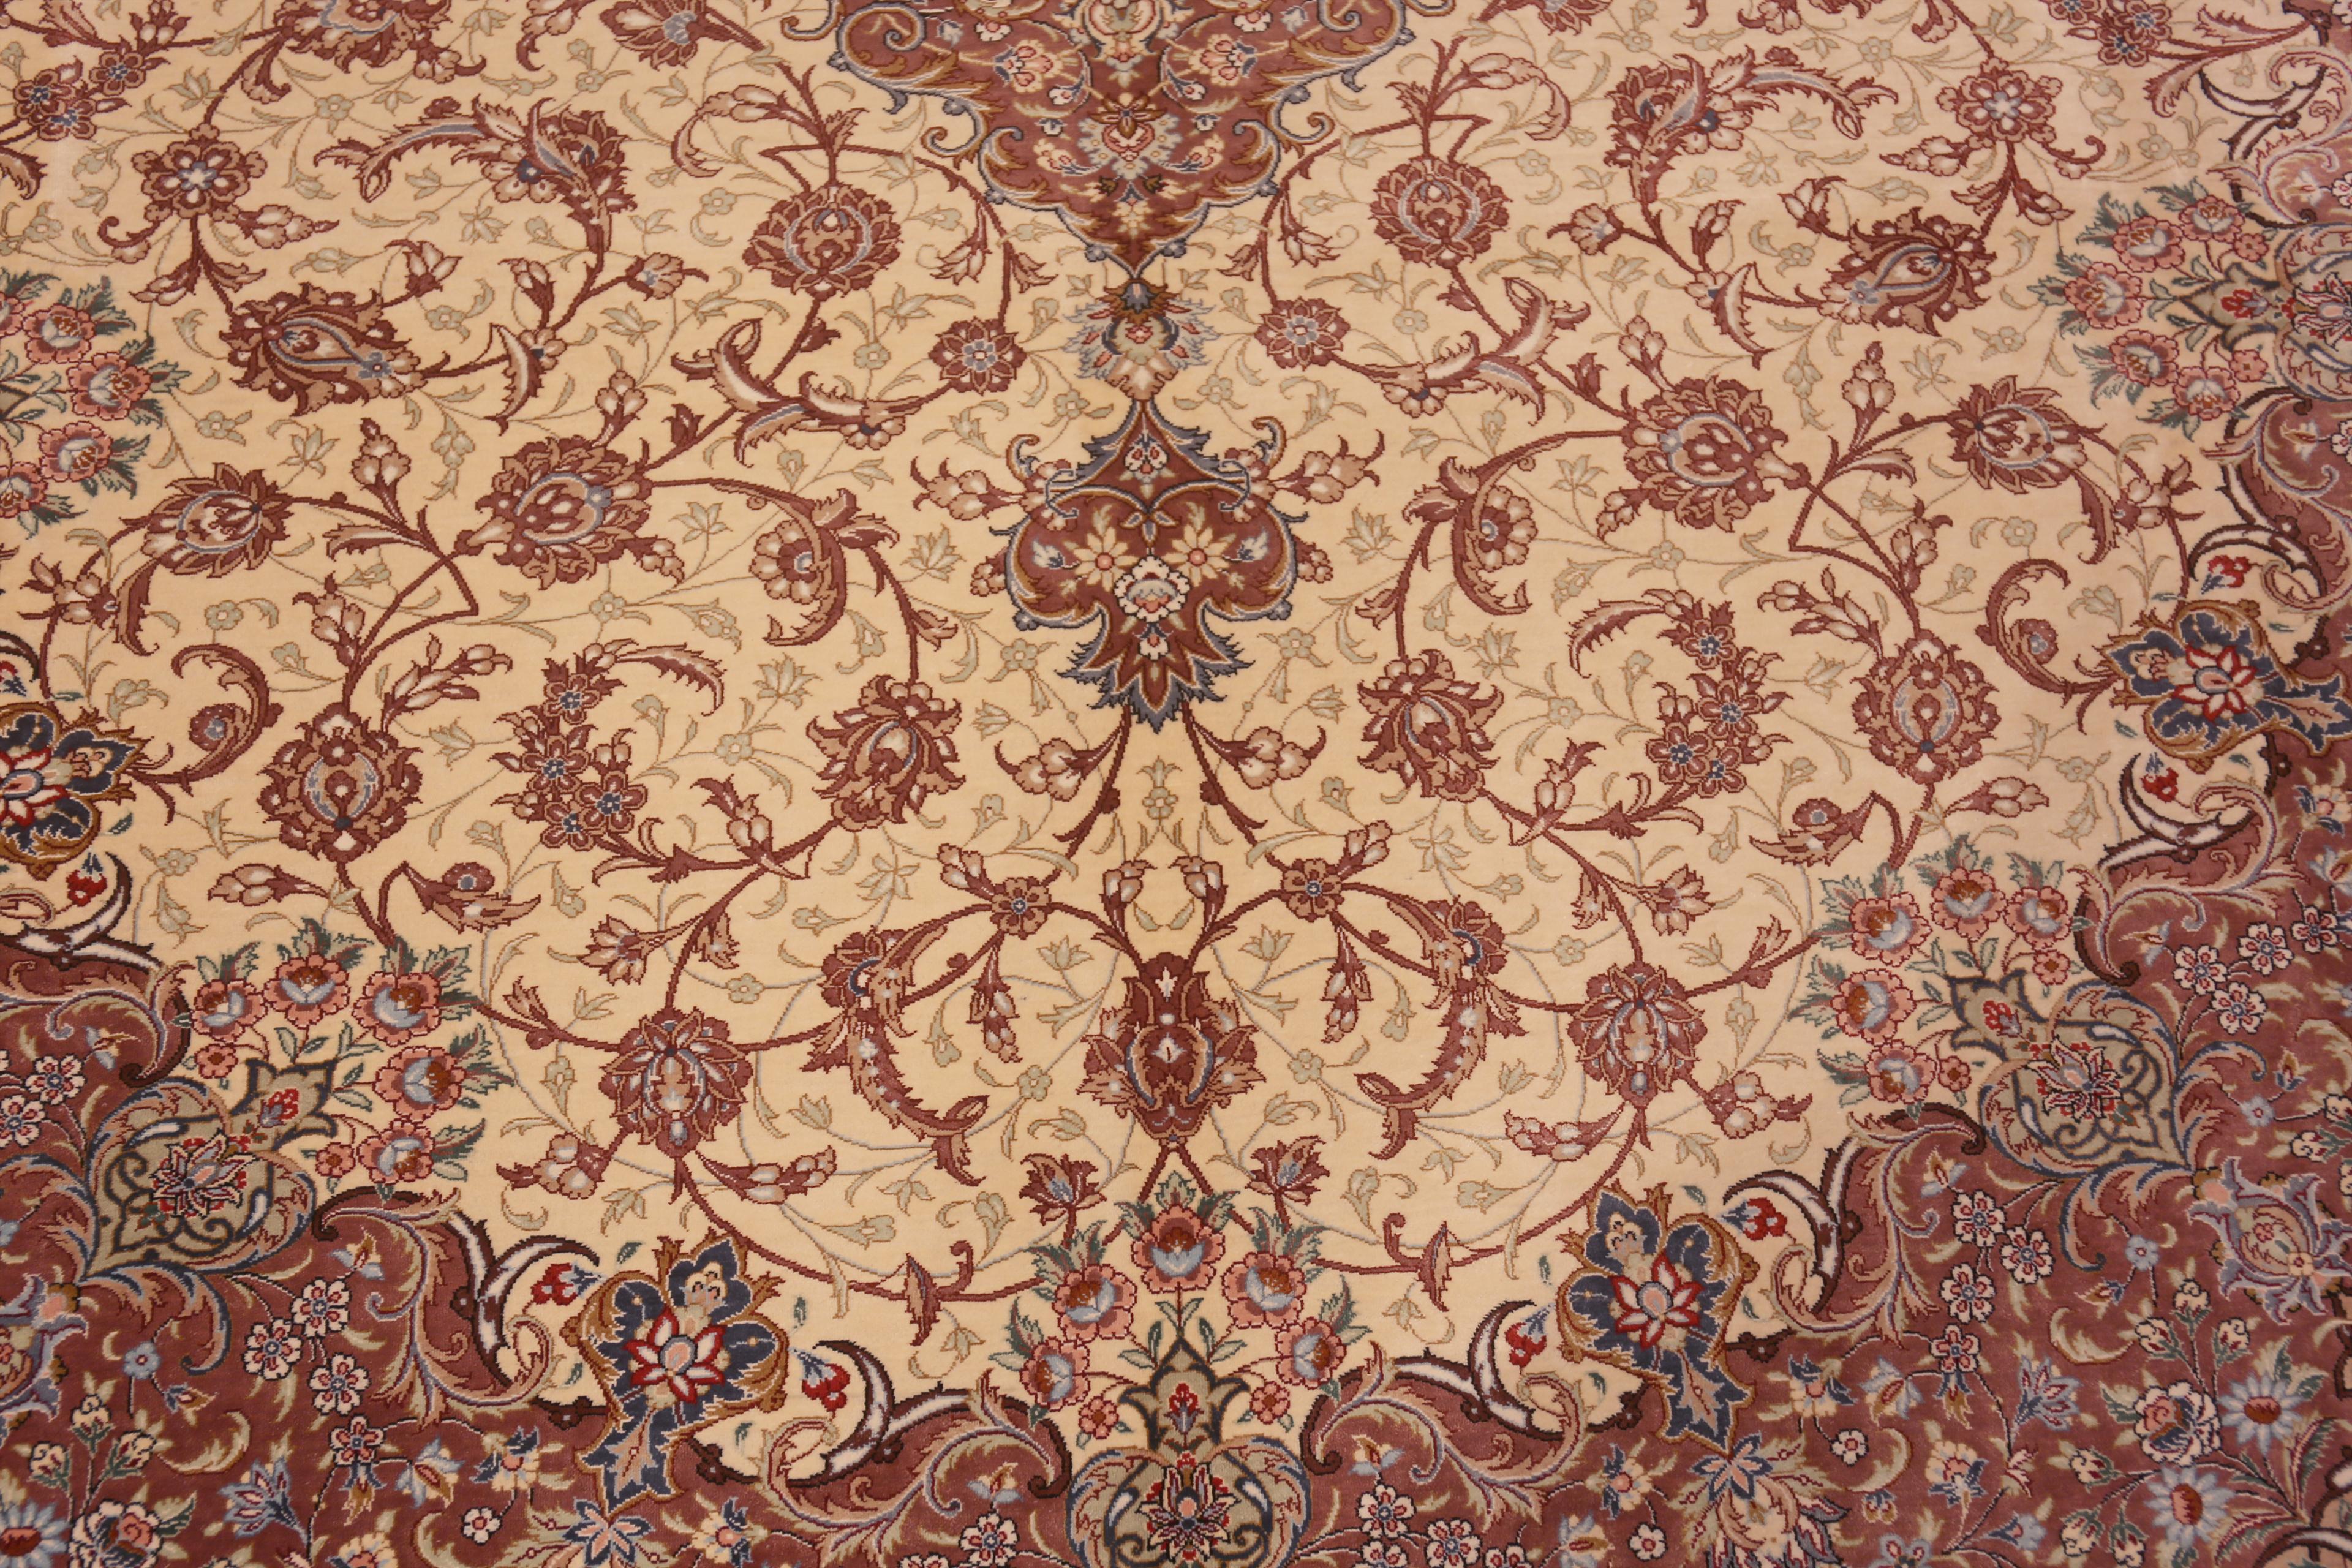 Fine Floral Room Size Vintage Luxurious Silk Persian Qum Medallion Rug, country of origin: Persian Rugs, Circa date: Vintage 